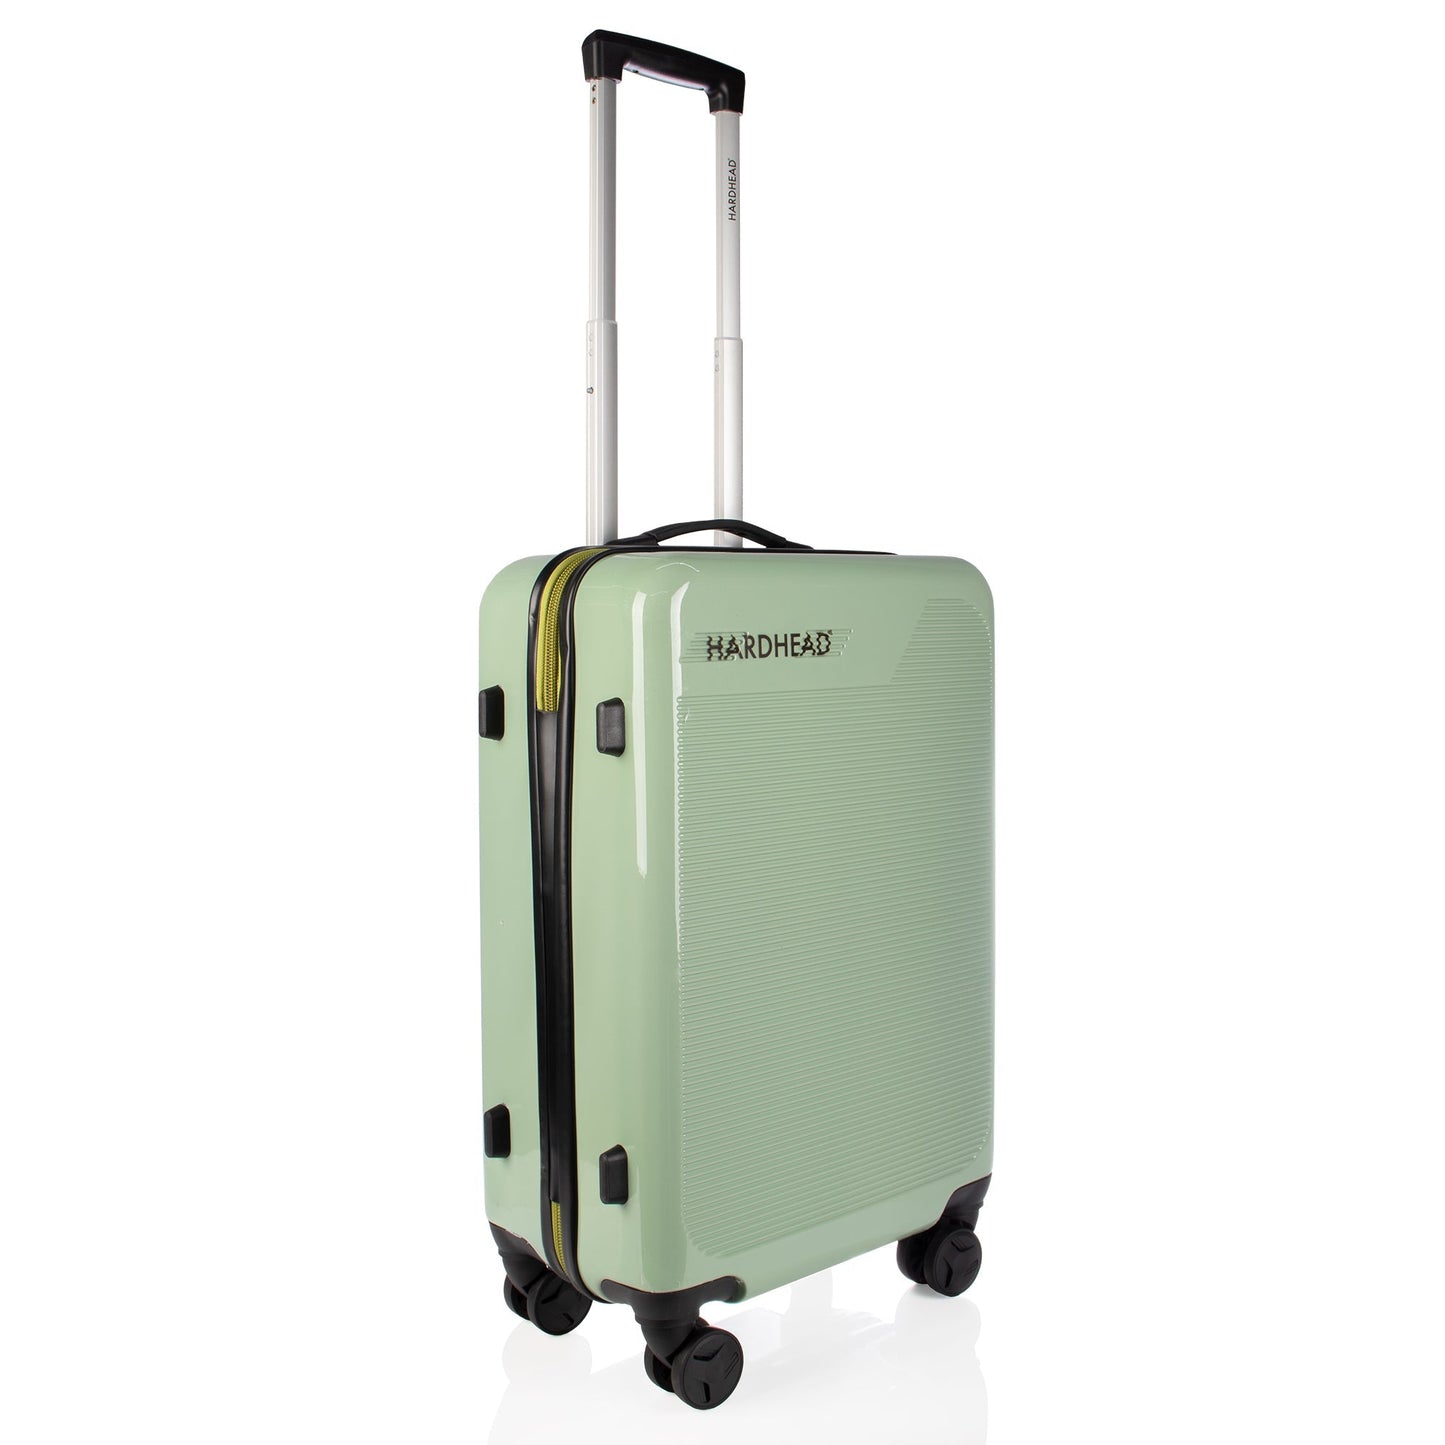 Boost Moon Rock 3 pieces luggage Set